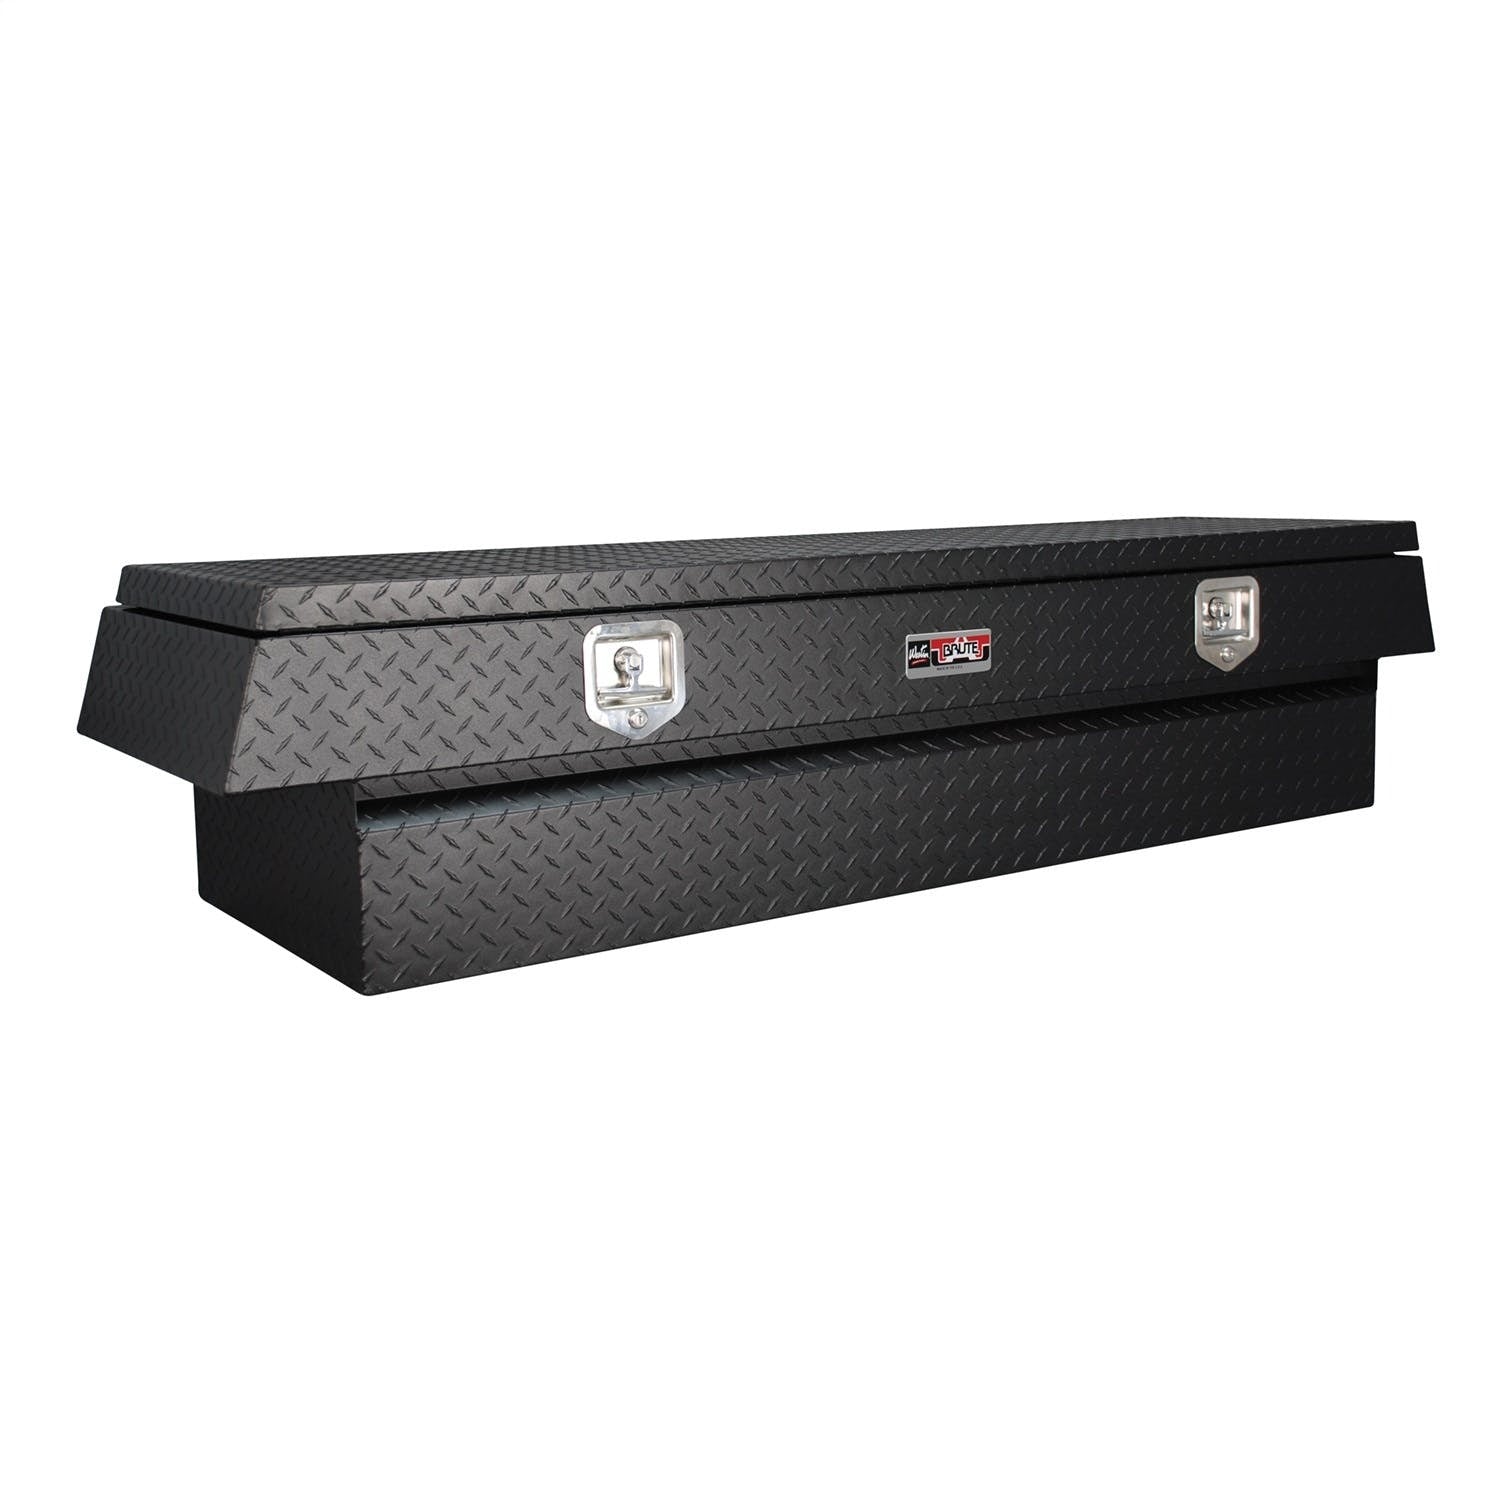 Westin Automotive 80-RB114GW-BT Gull Wing Lid Full Size Xtra Wide Overall Dims: 71x27x18 In.; Base Dims 60x27x11